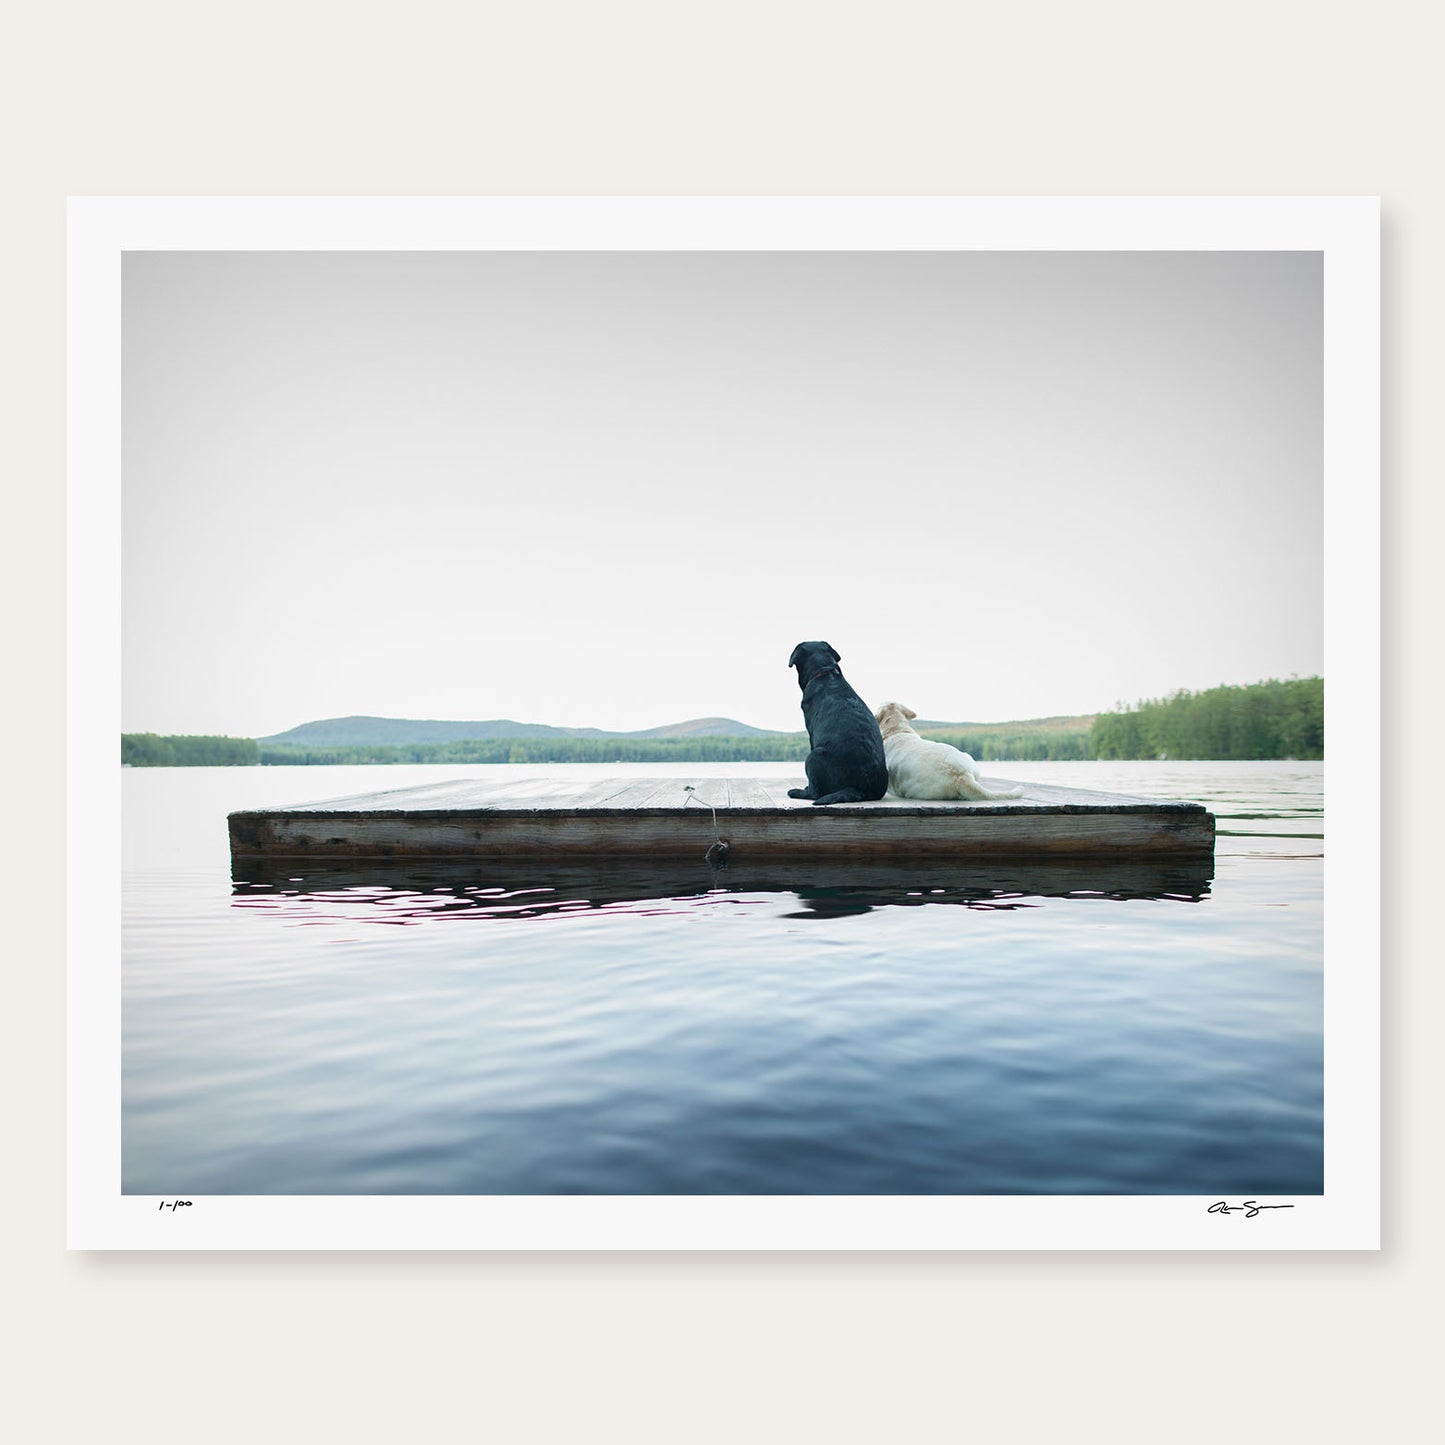 A Black and a yellow dog on a dock on a lake art print by photographer Ron Schmidt www.ronschmidt.art Wall Home Decor , Lake House Artwork. Large Wall Art Print. Collectible, Signed Limited Edition, Gift for Dog Lover